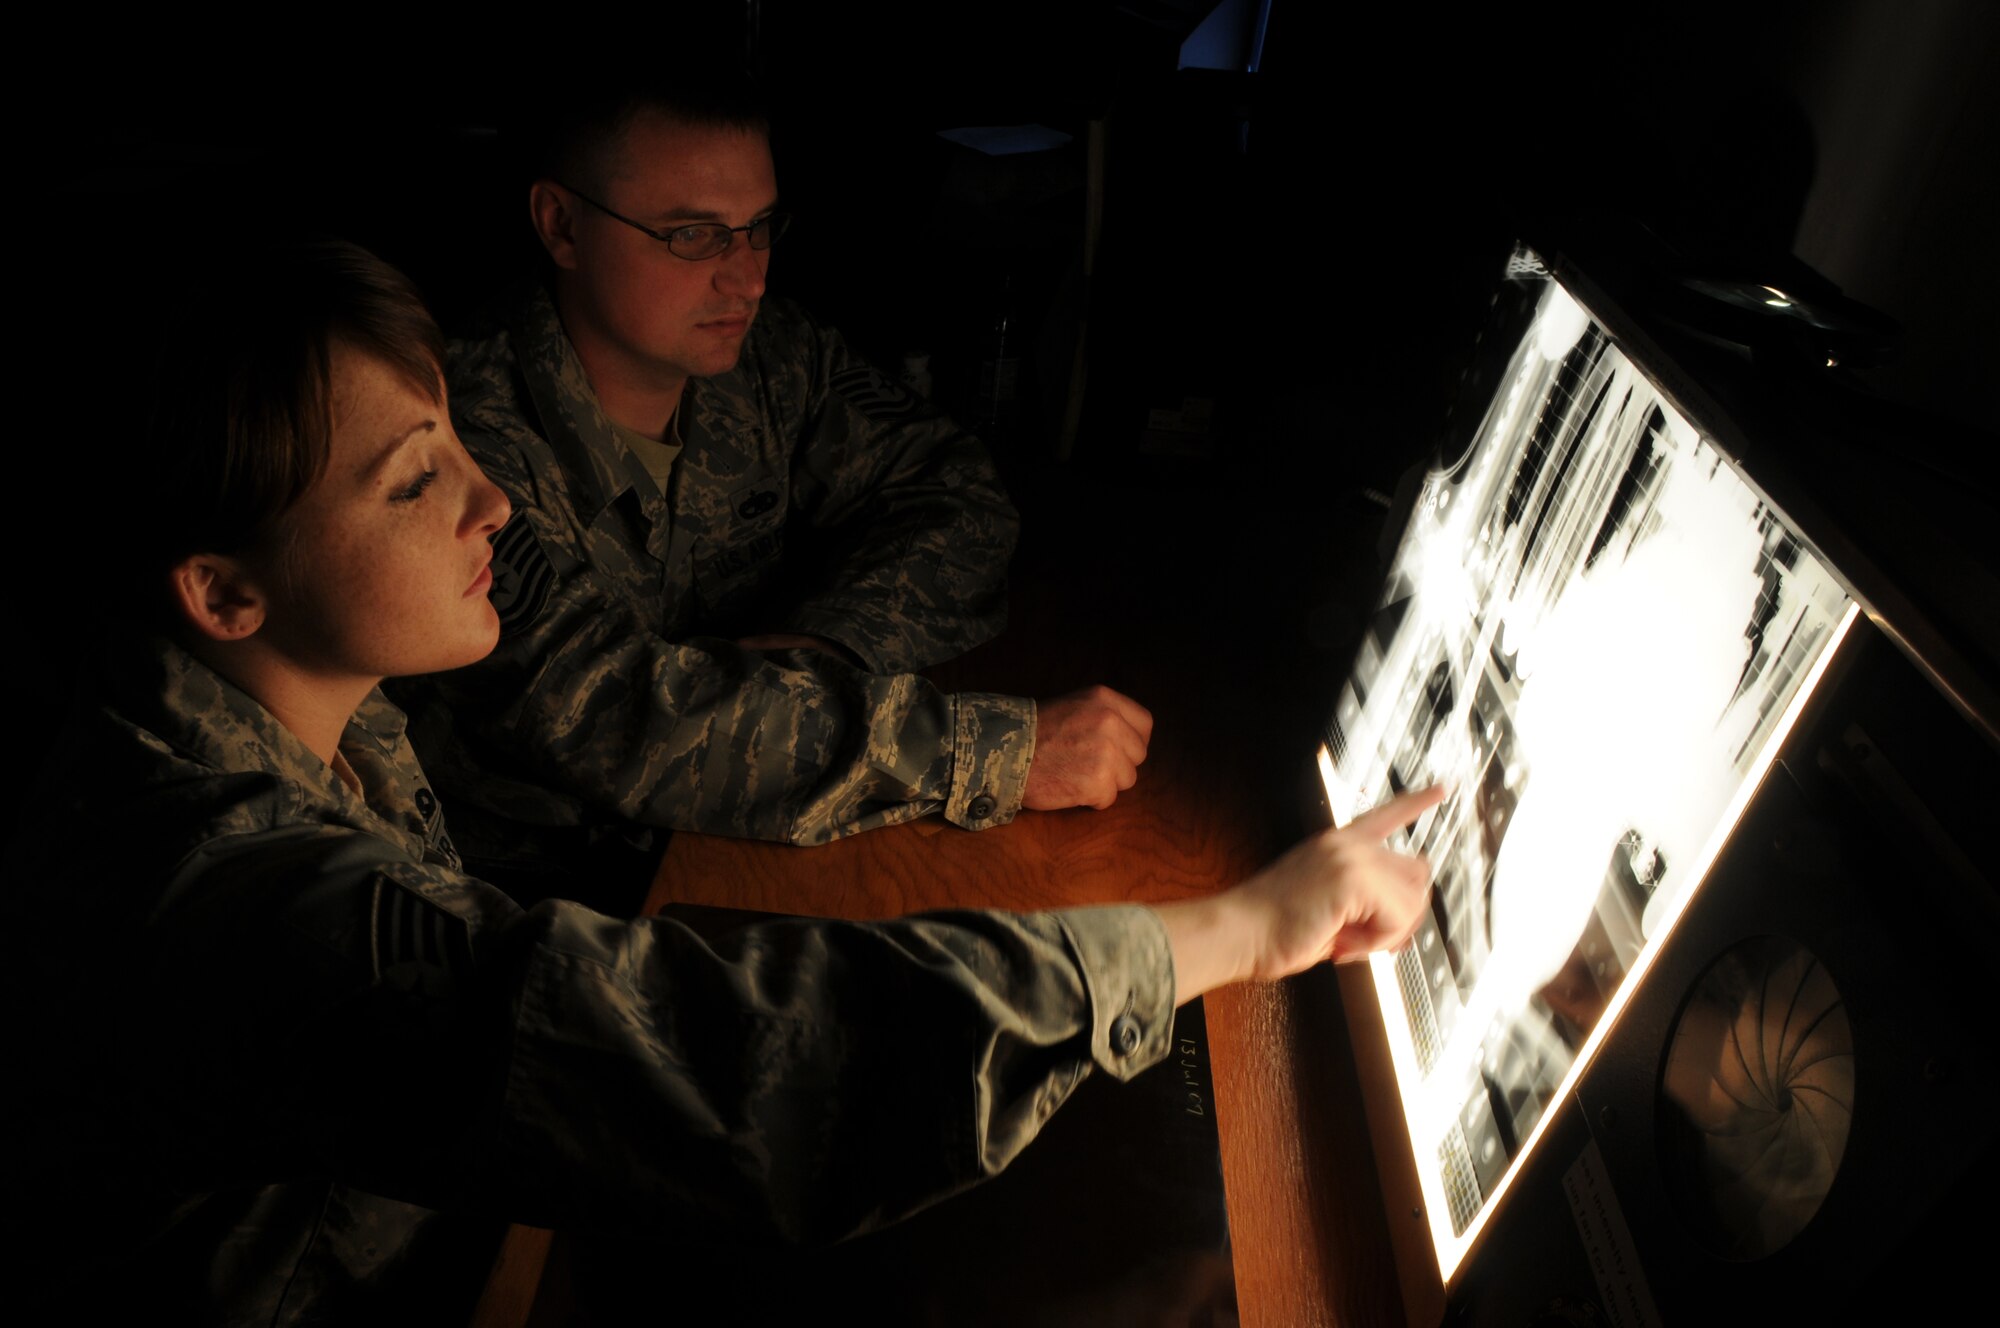 Staff Sgt. Cortney Coker, 48th Equipment Maintenance Squadron Non-Destruction Inspection journeyman, looks over an x-ray image of a section of F-15E Strike Eagle with Tech. Sgt. Sterling Rosenau, an F-15 phase crew chief with the same squadron. X-rays of the aircraft are taken pre and post inspection and then compared for variations or defects. (U.S. Air Force photo by Staff Sgt. Nathan Gallahan)